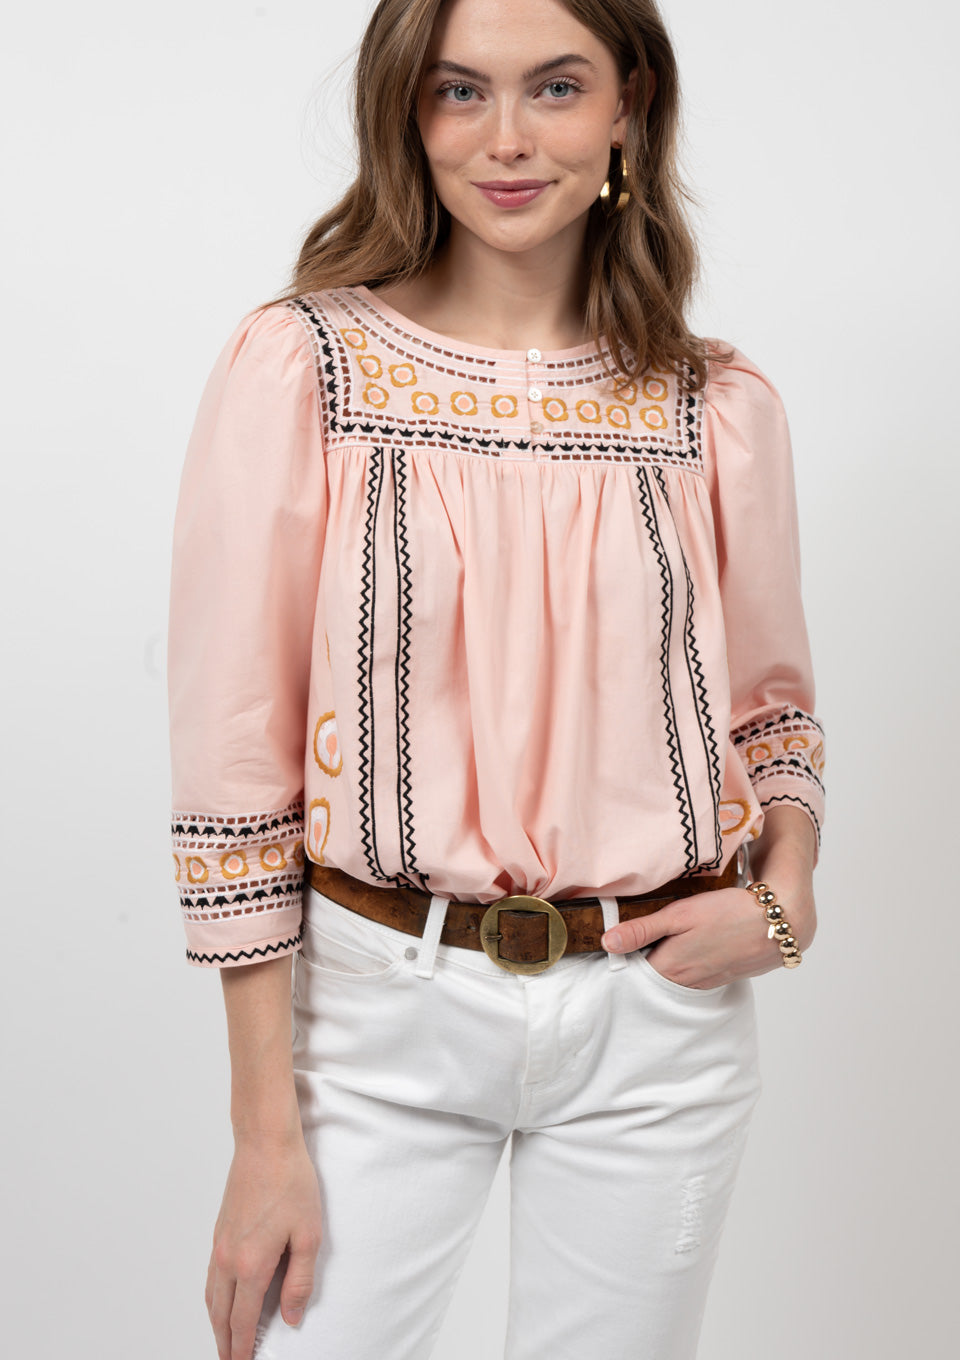 Ivy Jane Petals and Pearls Top